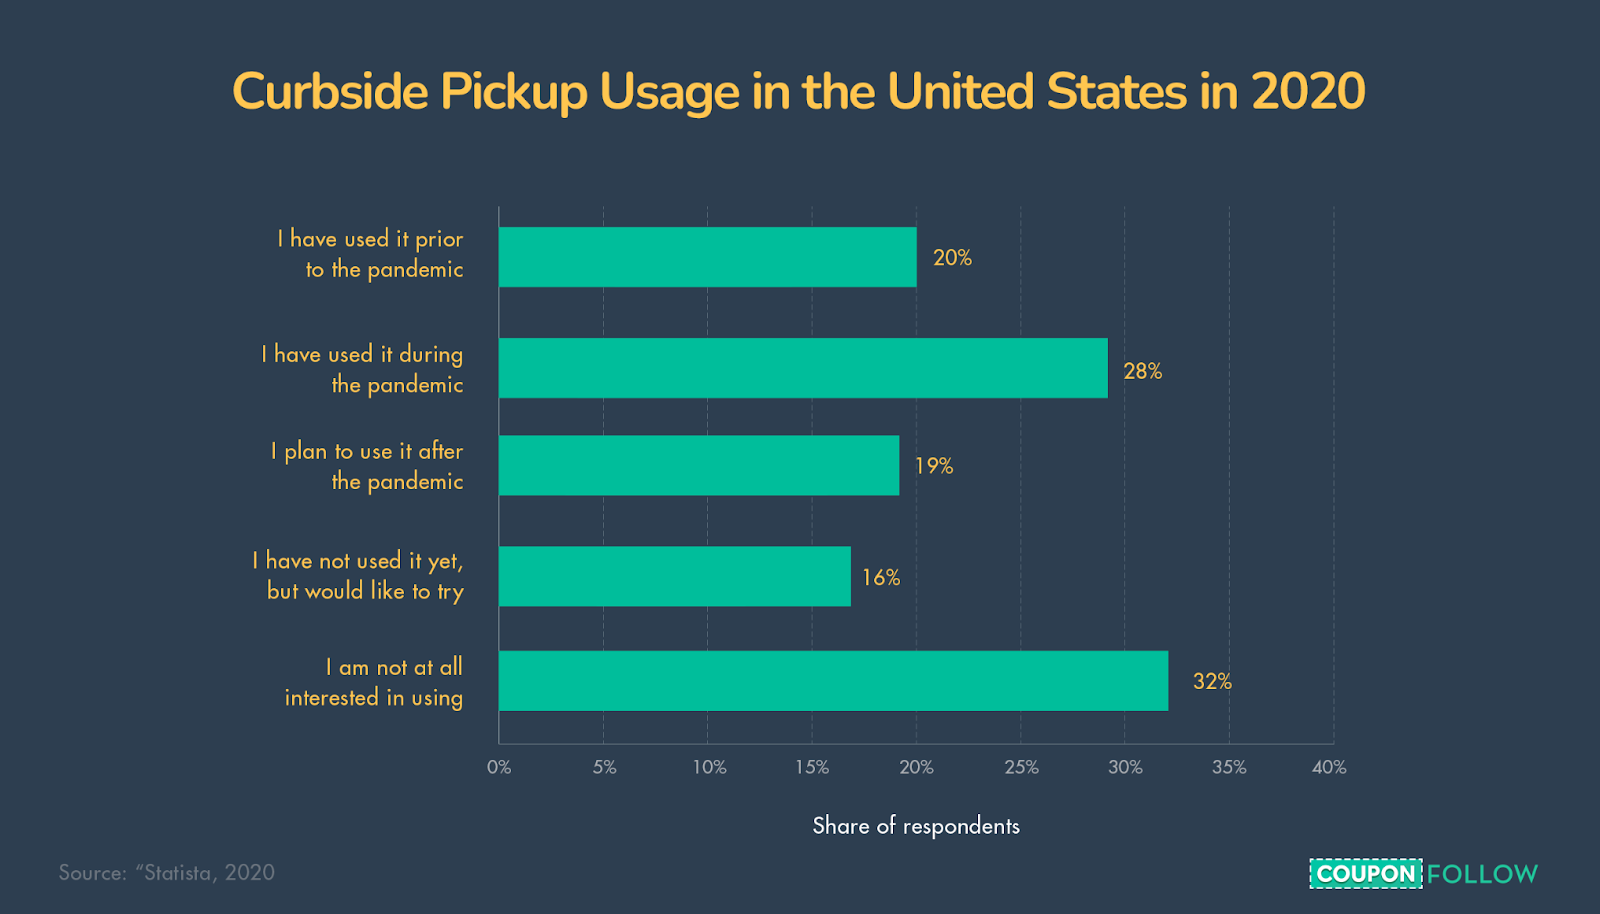 graph showing curbside pickup usage behavior in the United States
